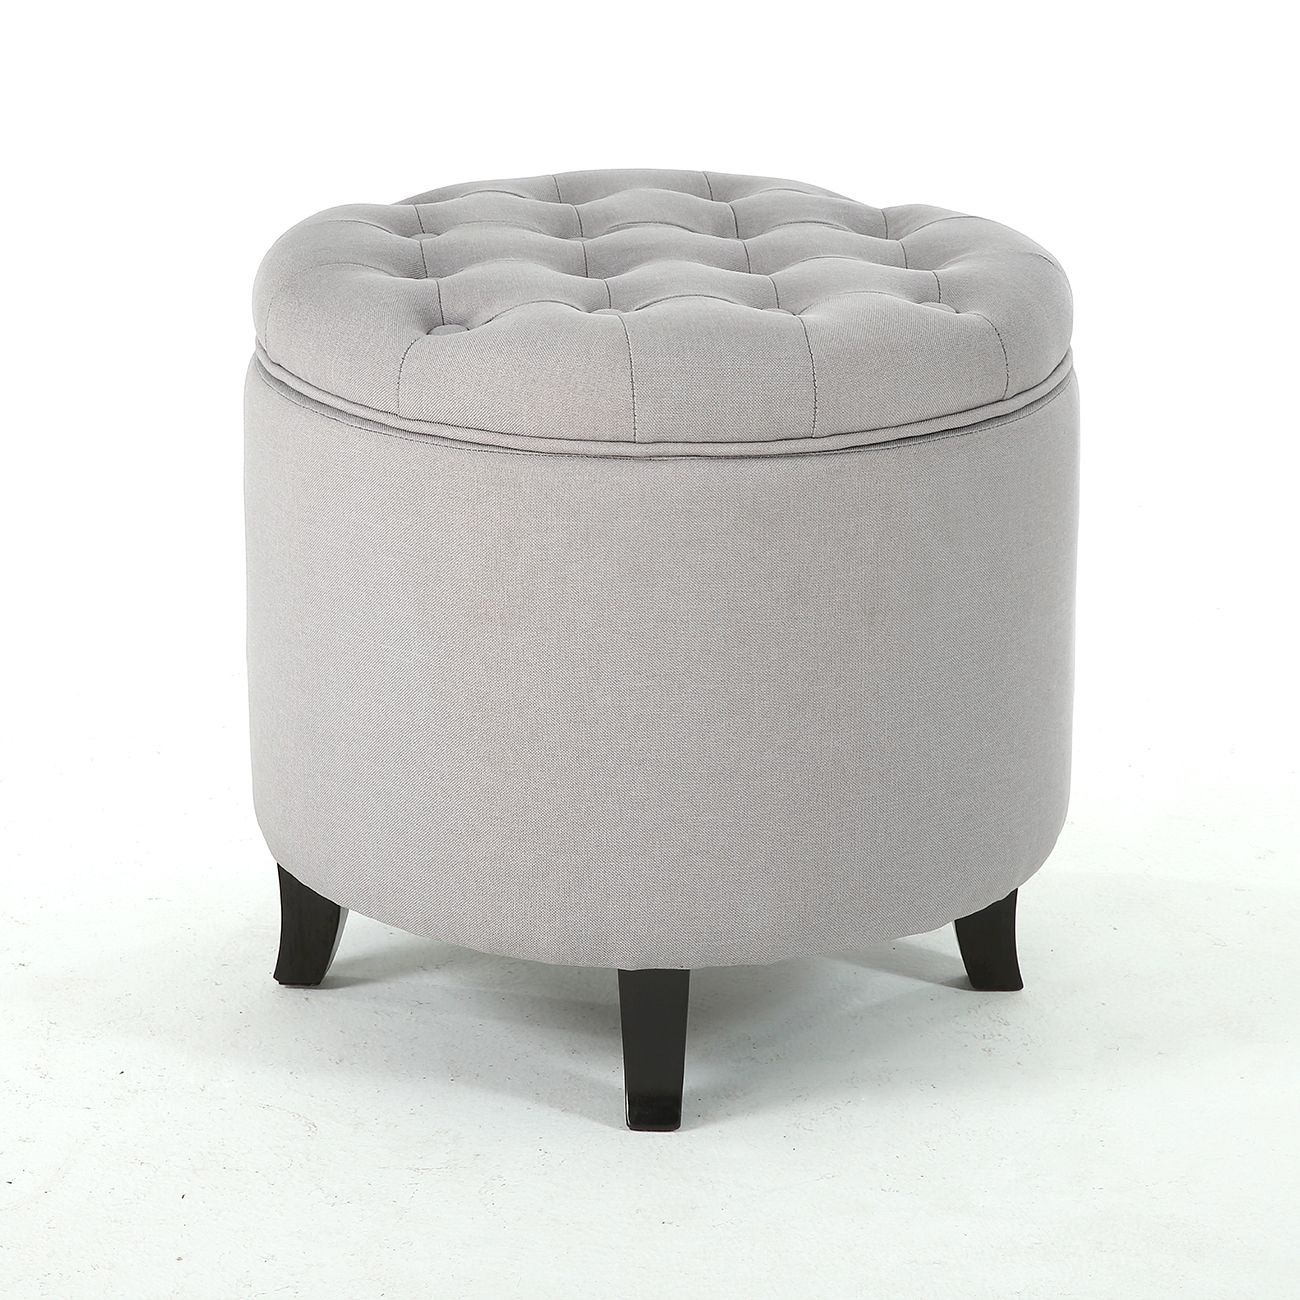 Classic Storage Ottoman Seat Nailhead Trim Large Round Tufted Table Within Light Gray Tufted Round Wood Ottomans With Storage (View 16 of 20)